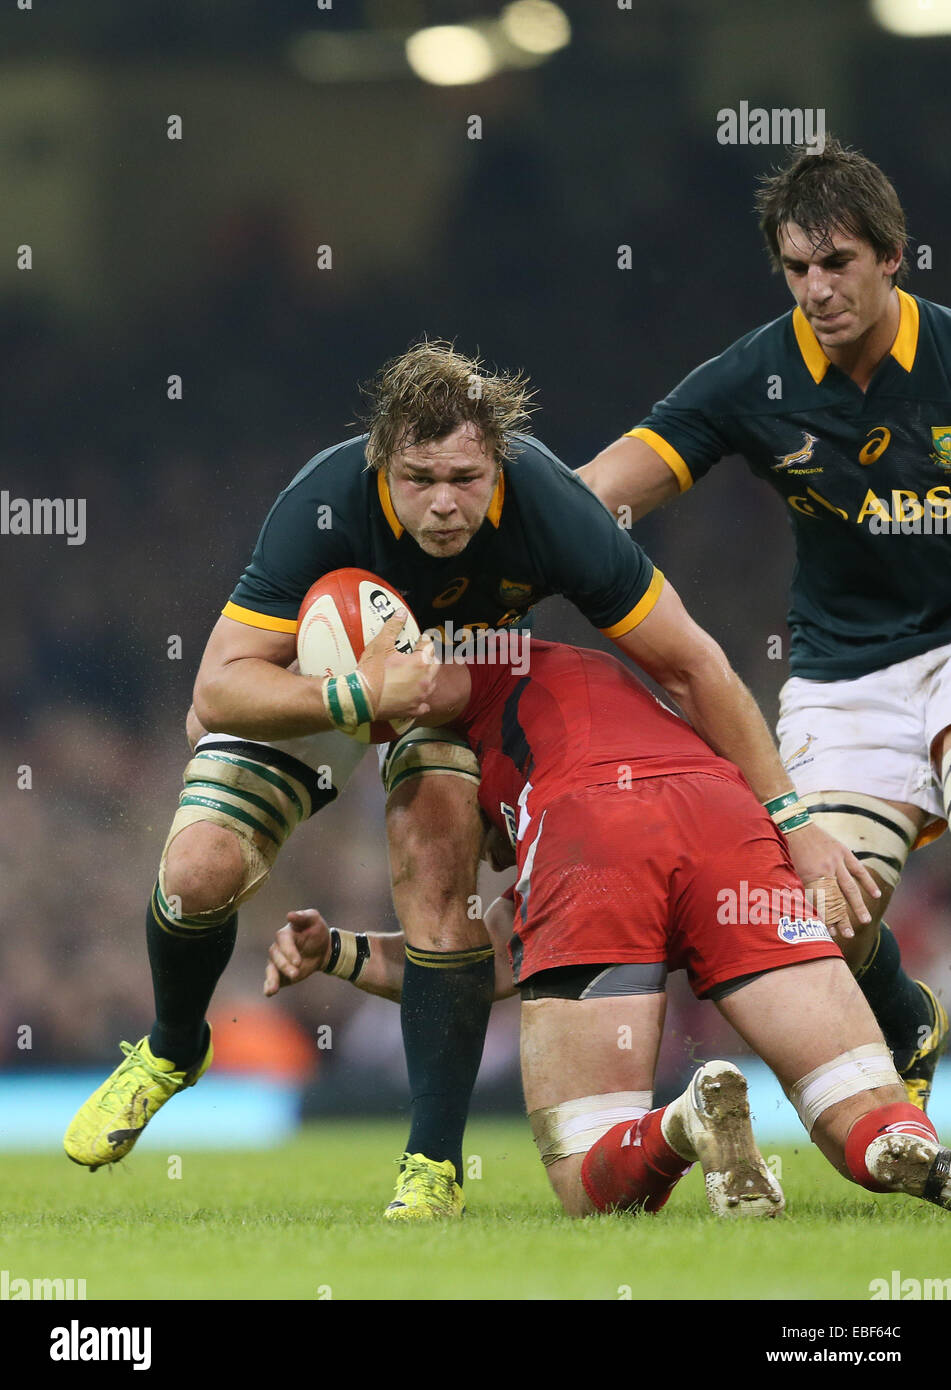 Cardiff, UK. 29th Nov, 2014. Duane Vermeulen of South Africa - Autumn Internationals - Wales vs South Africa - Millennium Stadium - Cardiff - Wales - 29th November 2014 - Picture Simon Bellis/Sportimage. Credit:  csm/Alamy Live News Stock Photo